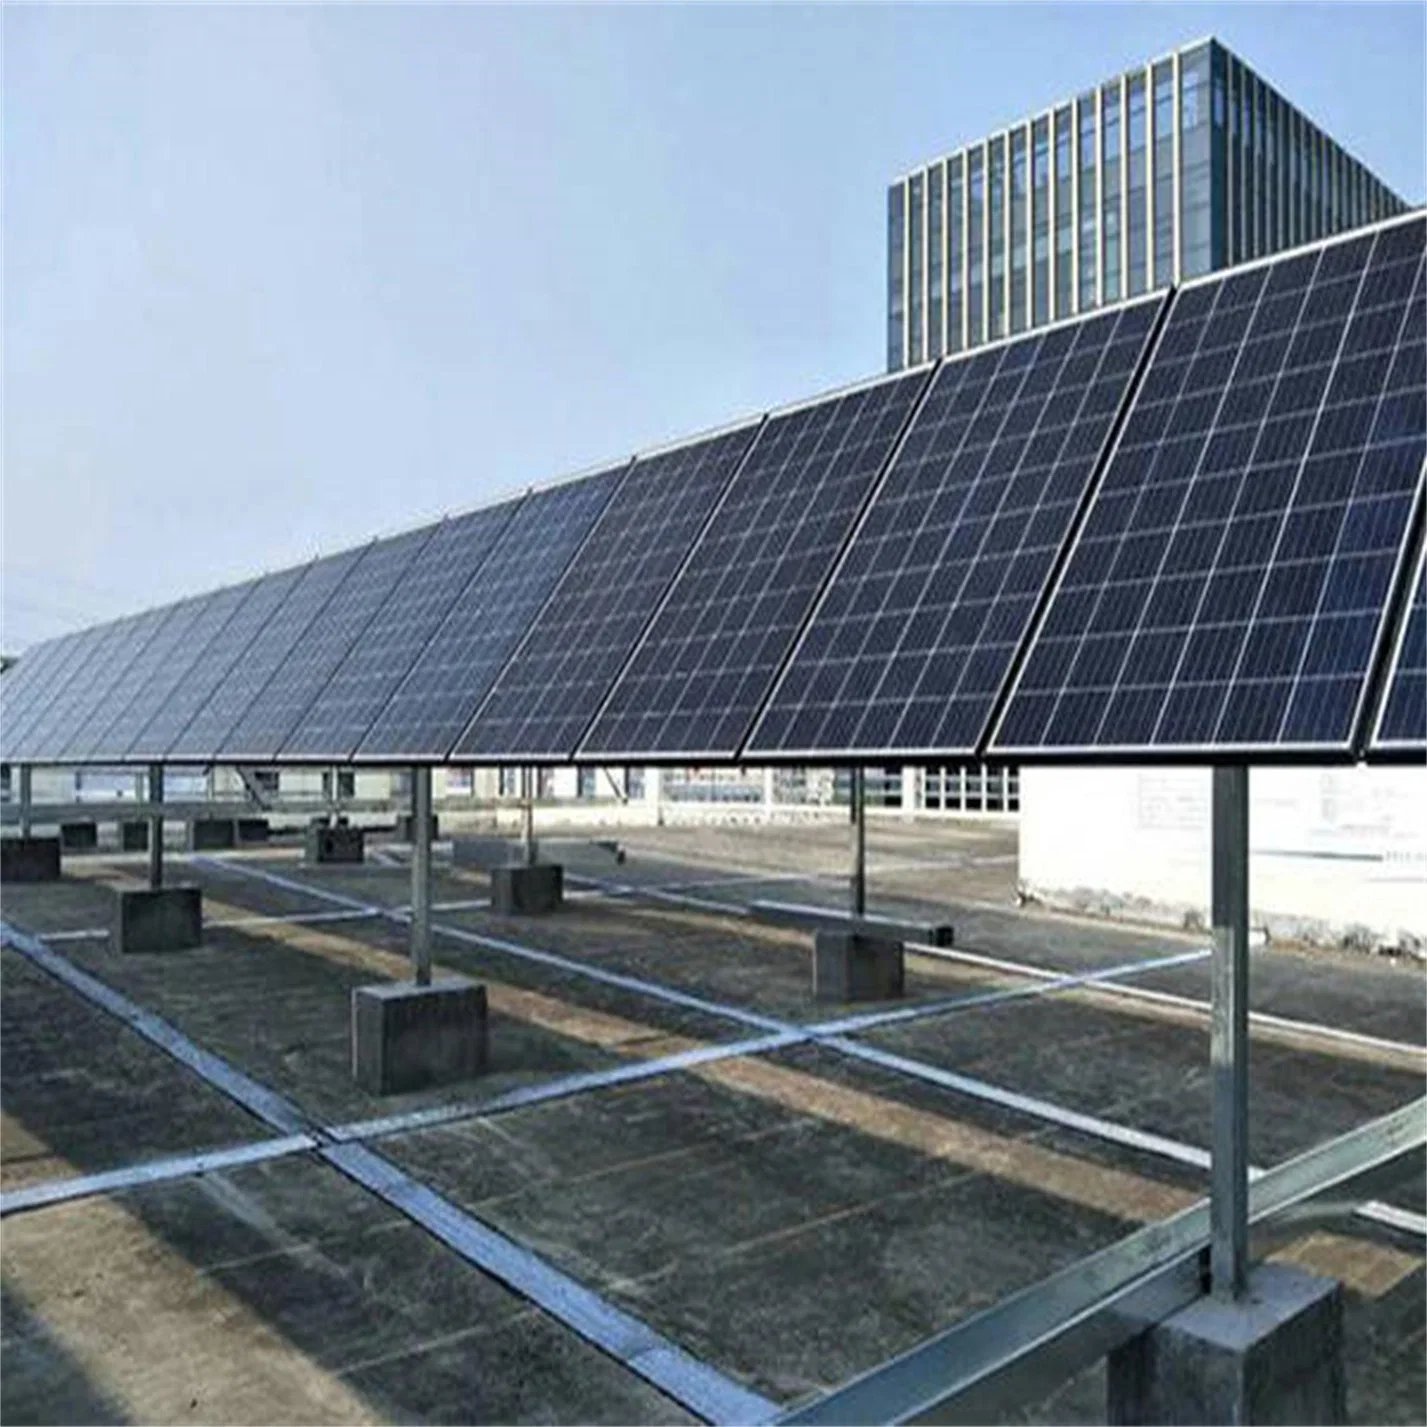 Carbon Steel Series U-Shaped Steel Photovoltaic Support